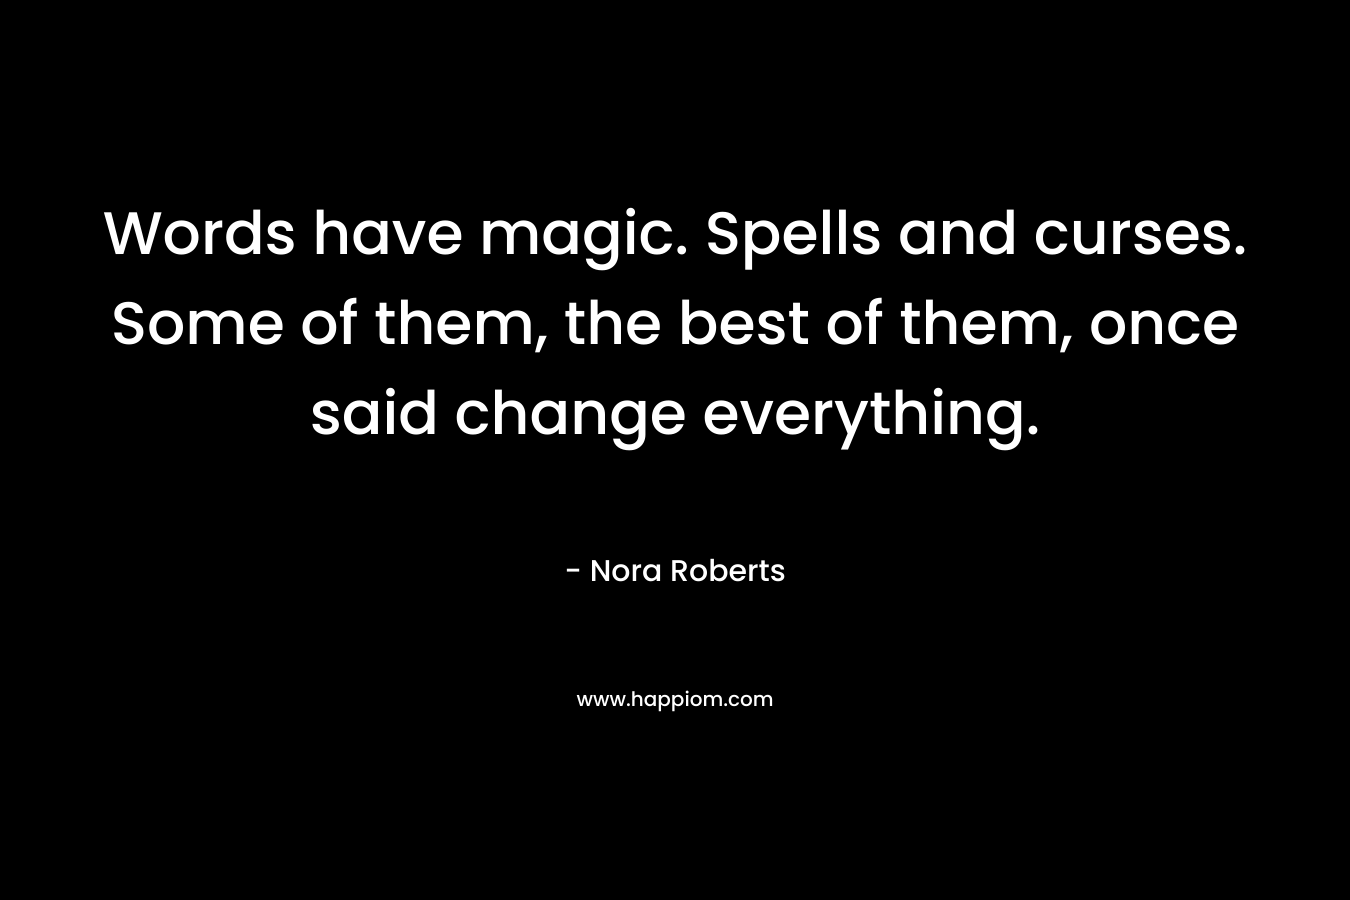 Words have magic. Spells and curses. Some of them, the best of them, once said change everything. – Nora Roberts